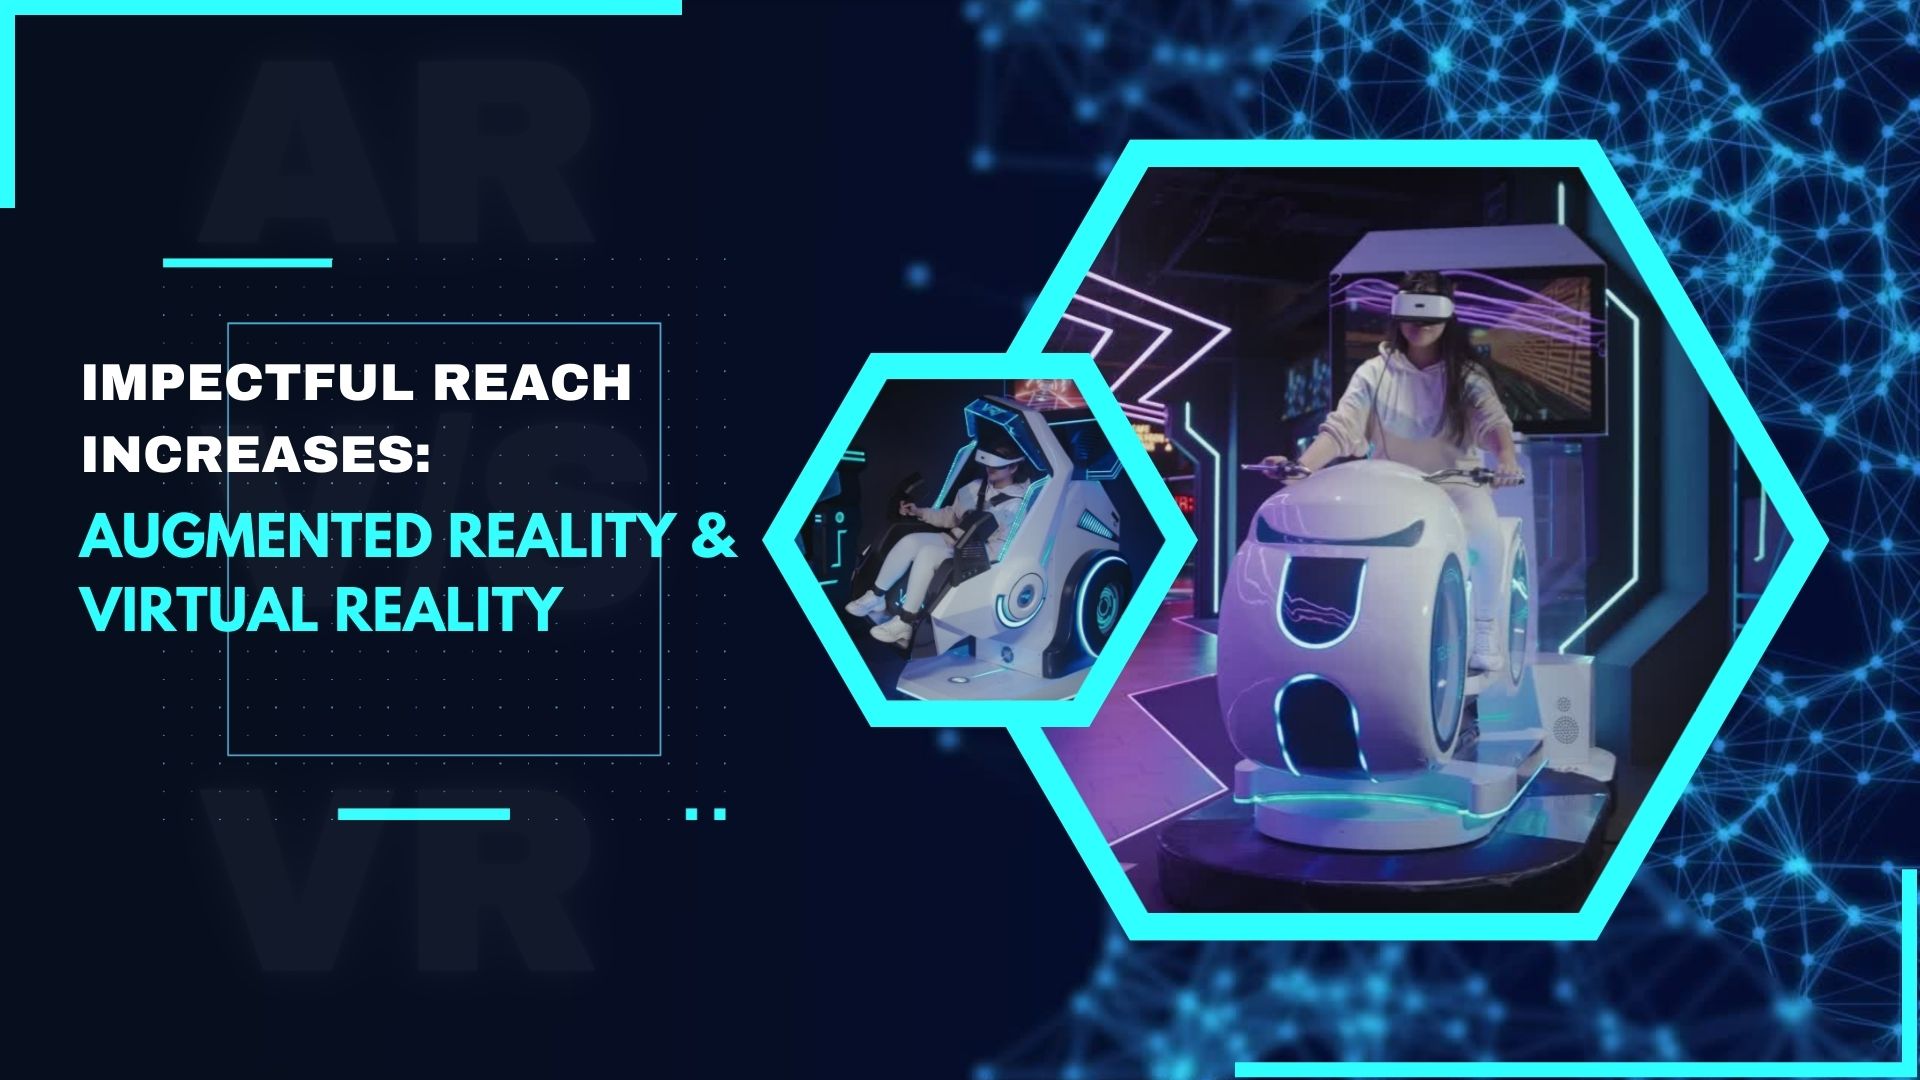 Impactful reach increases: Augmented Reality & Virtual Reality